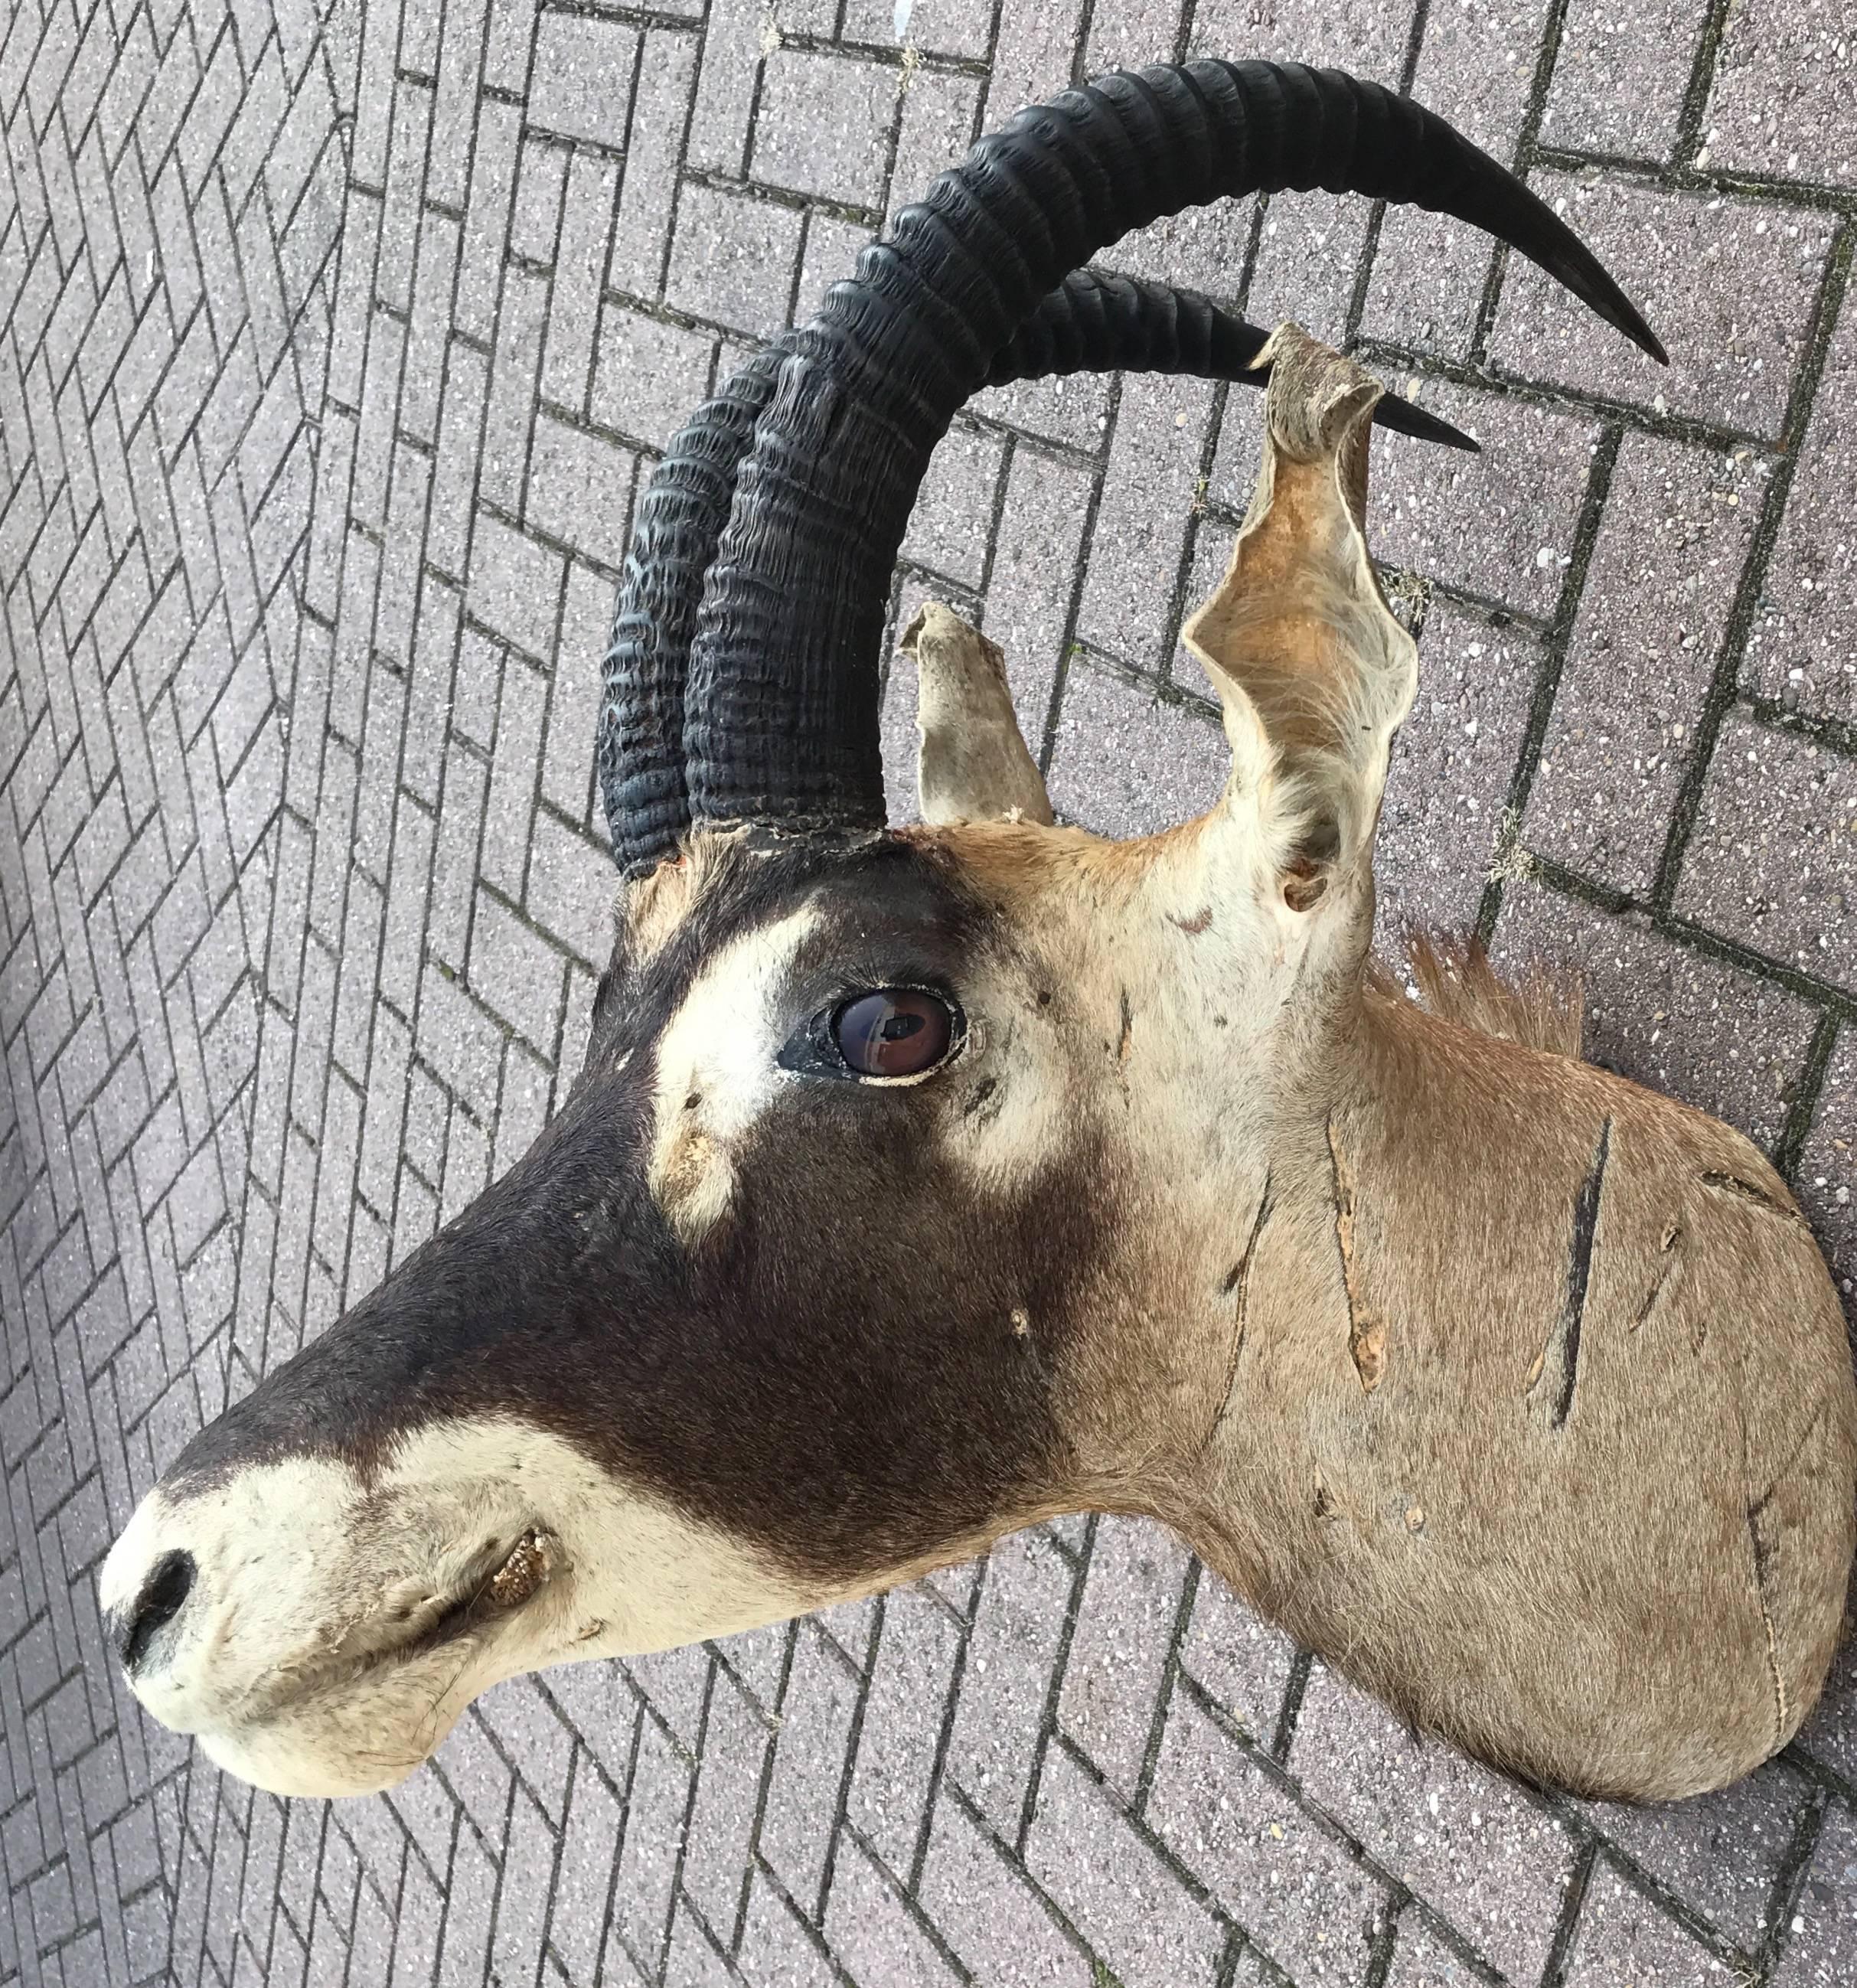 Majestic looking African oryx antelope.

From a wonderful home in the old centre of The Hague, Holland we acquired this large and highly decorative Oryx antelope. Even though it has some cuts to the skin, the look and feel of this animal from the